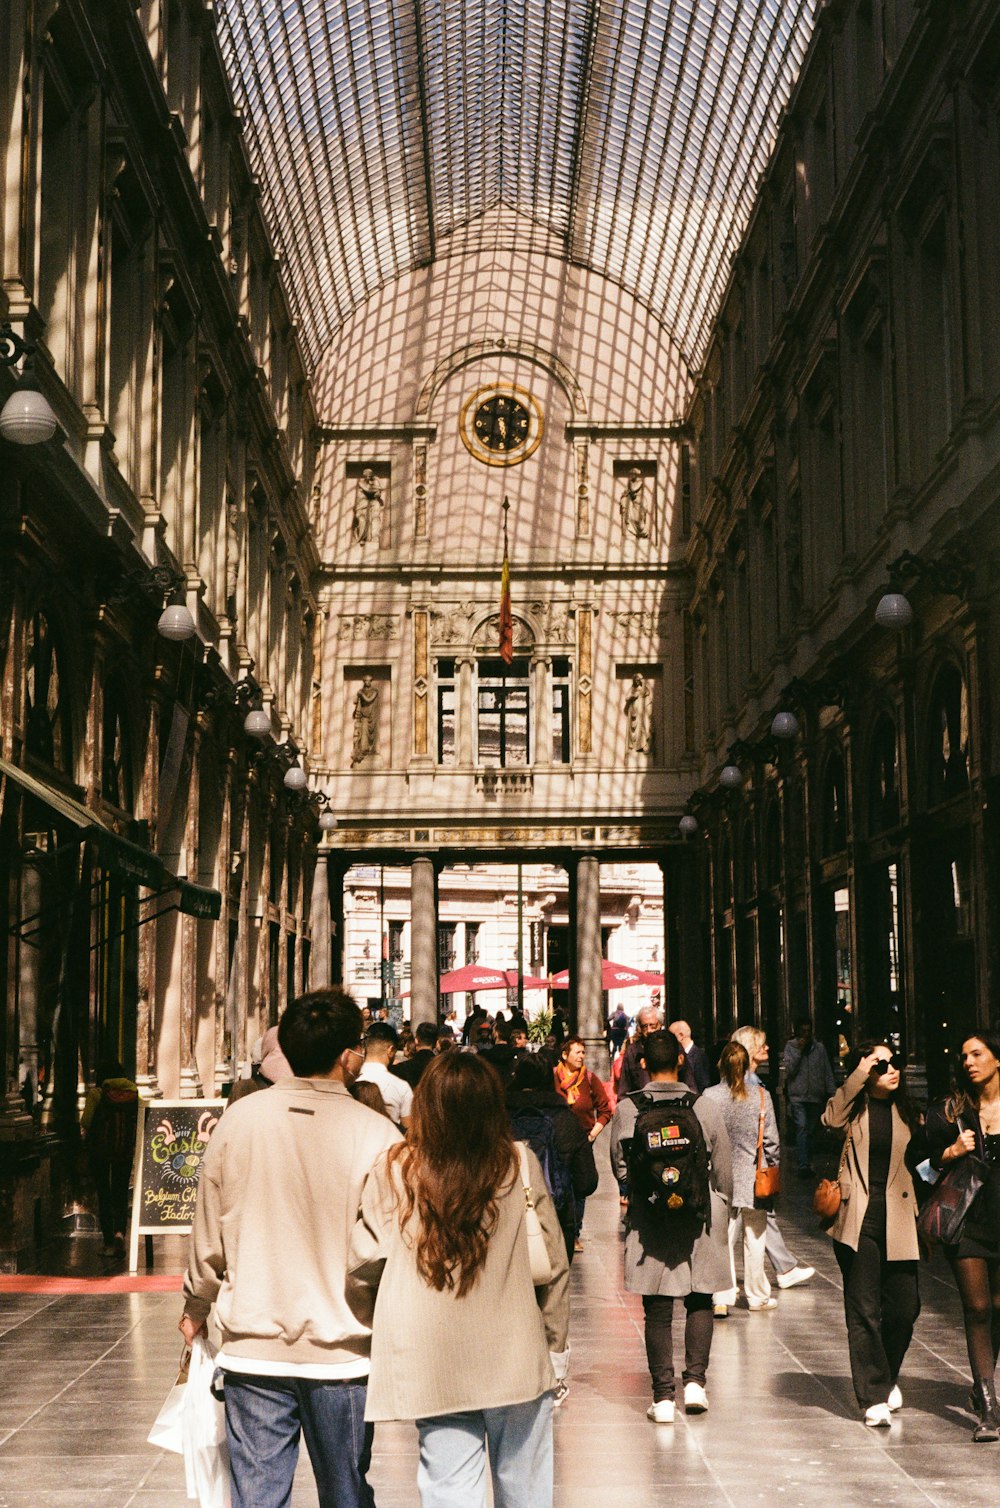 people walking in a large building